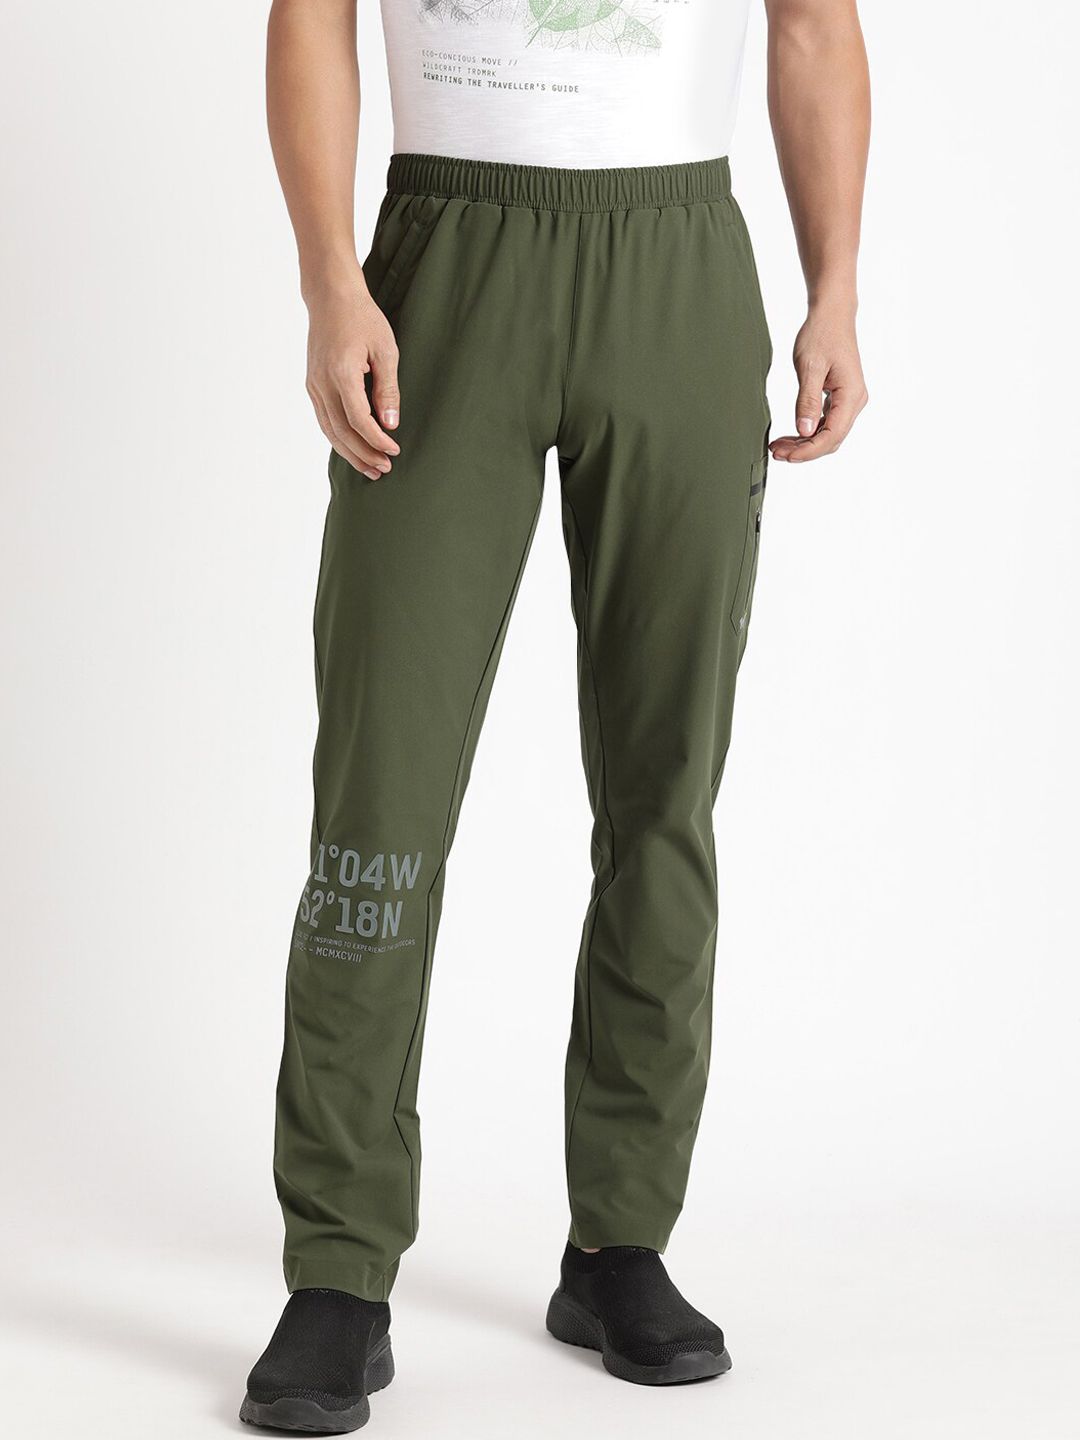 Wildcraft Women Joggers Camping Pants Green at Stepin Adventure Buy  online on httpswwwstepinadventurecominpWildcr  Camping pants  Joggers womens Pants